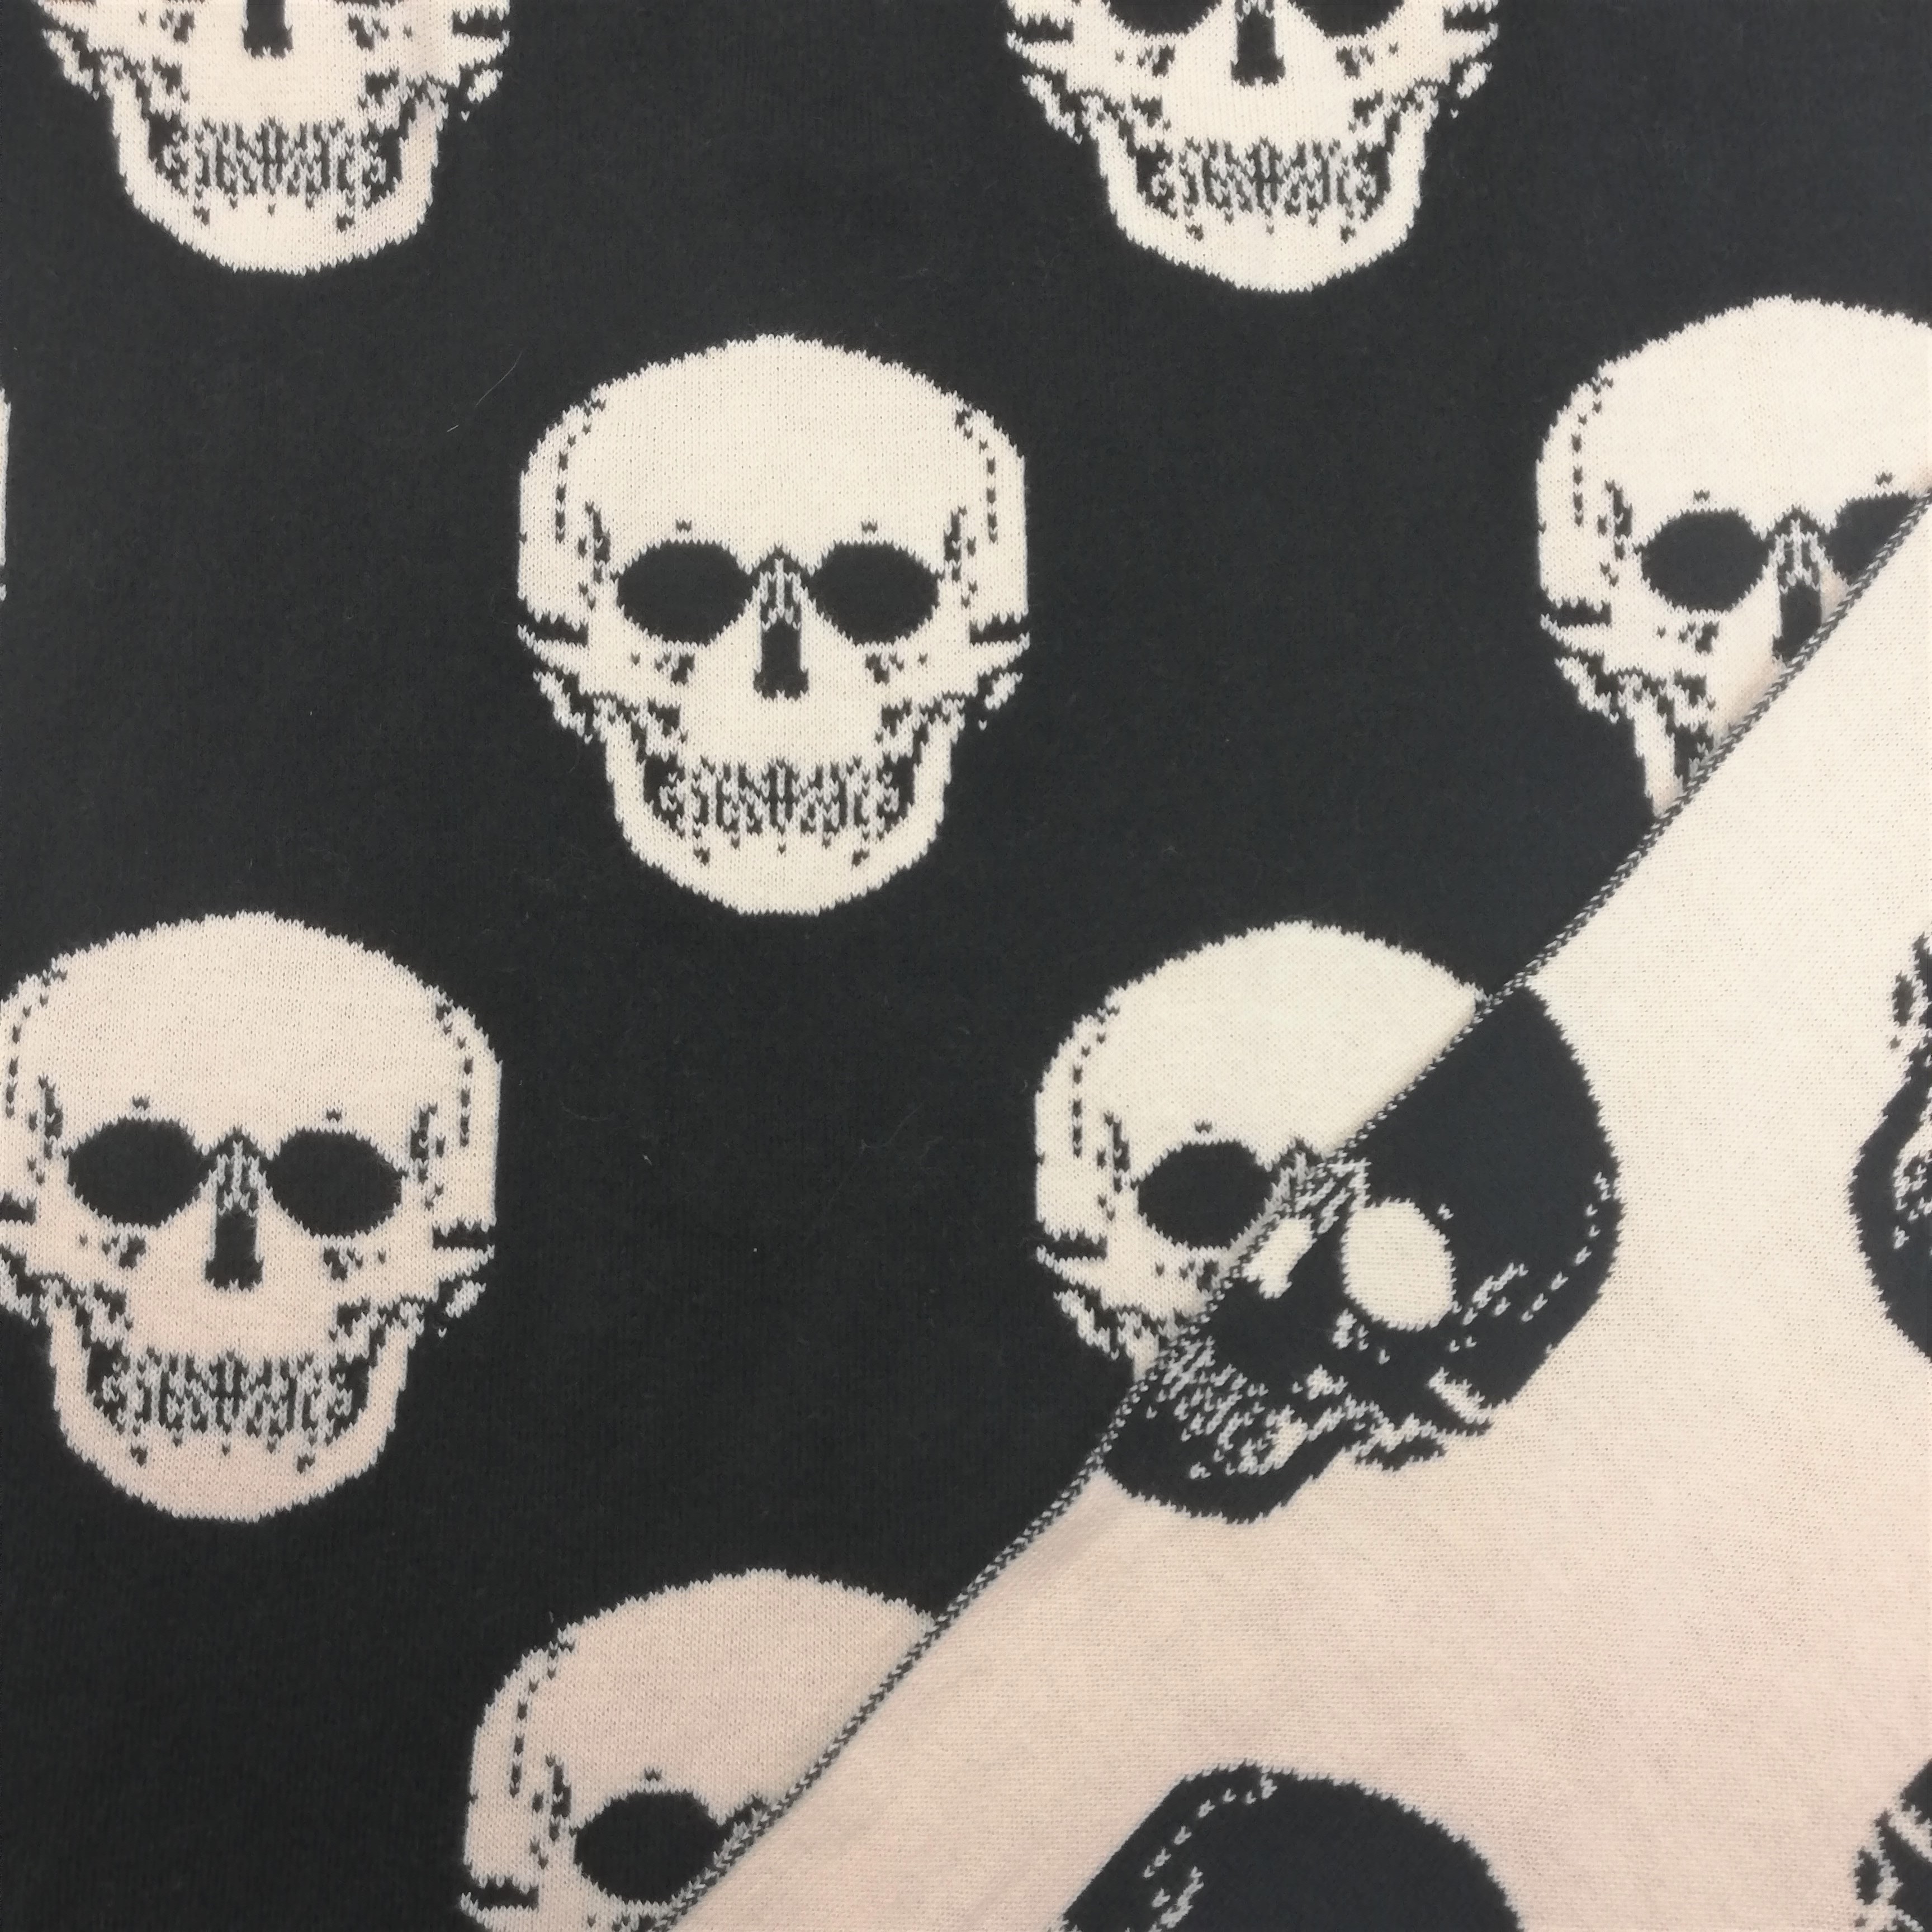 Knit Sweater Fabric with Doubleface Skull Design in Black and Ivory